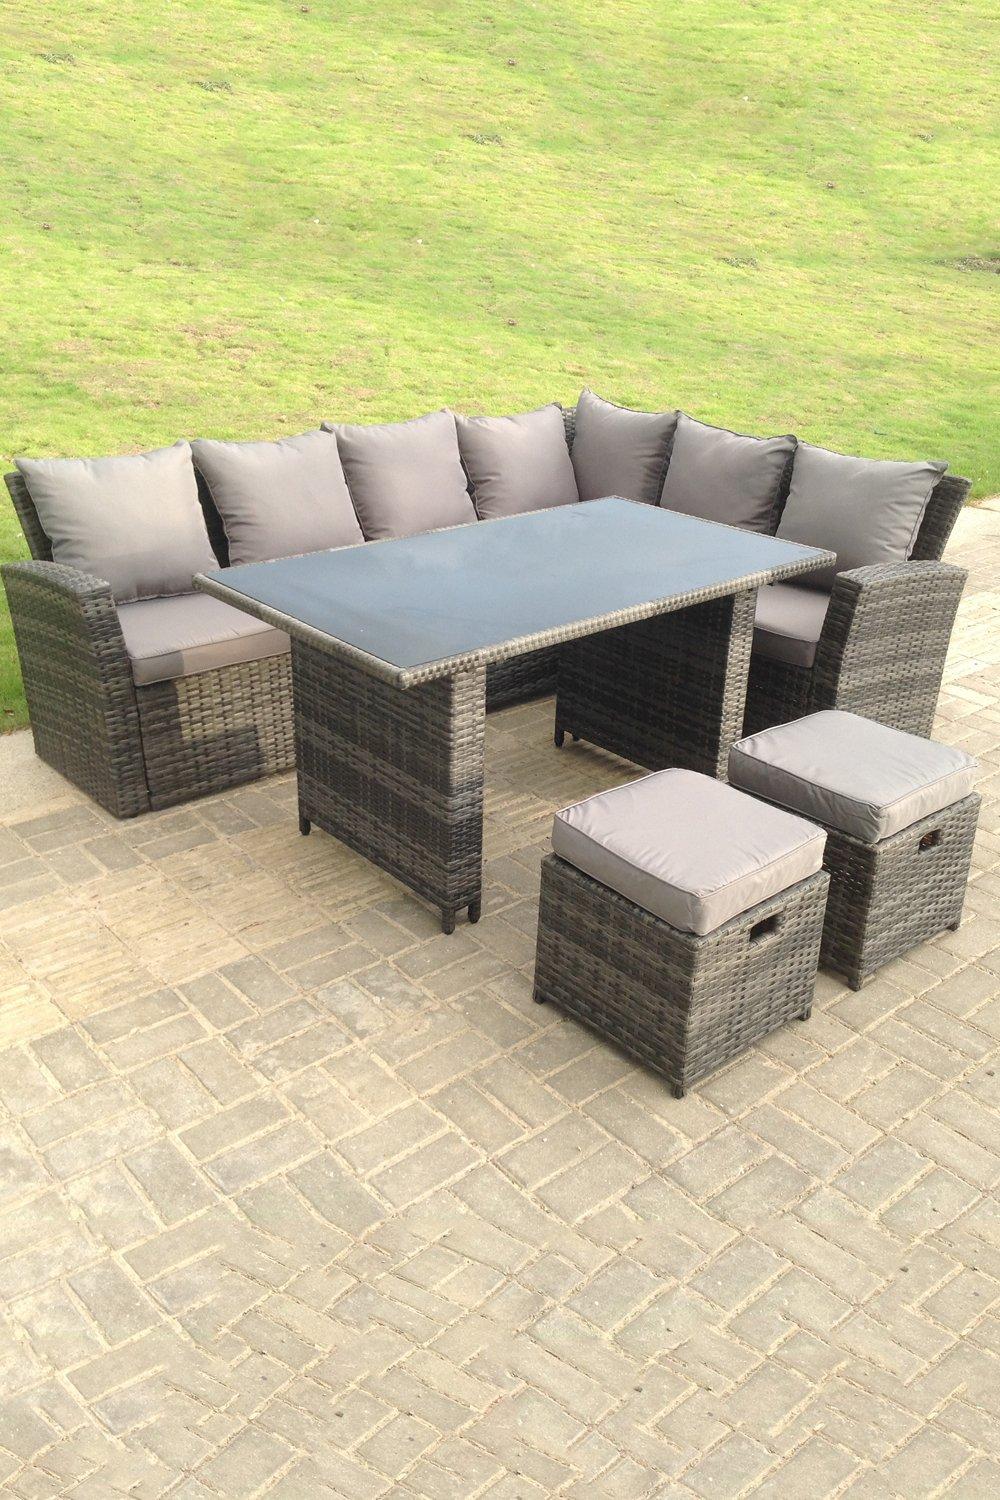 High Back Rattan Corner Sofa Dining Table With Stools 8 Seater right corner